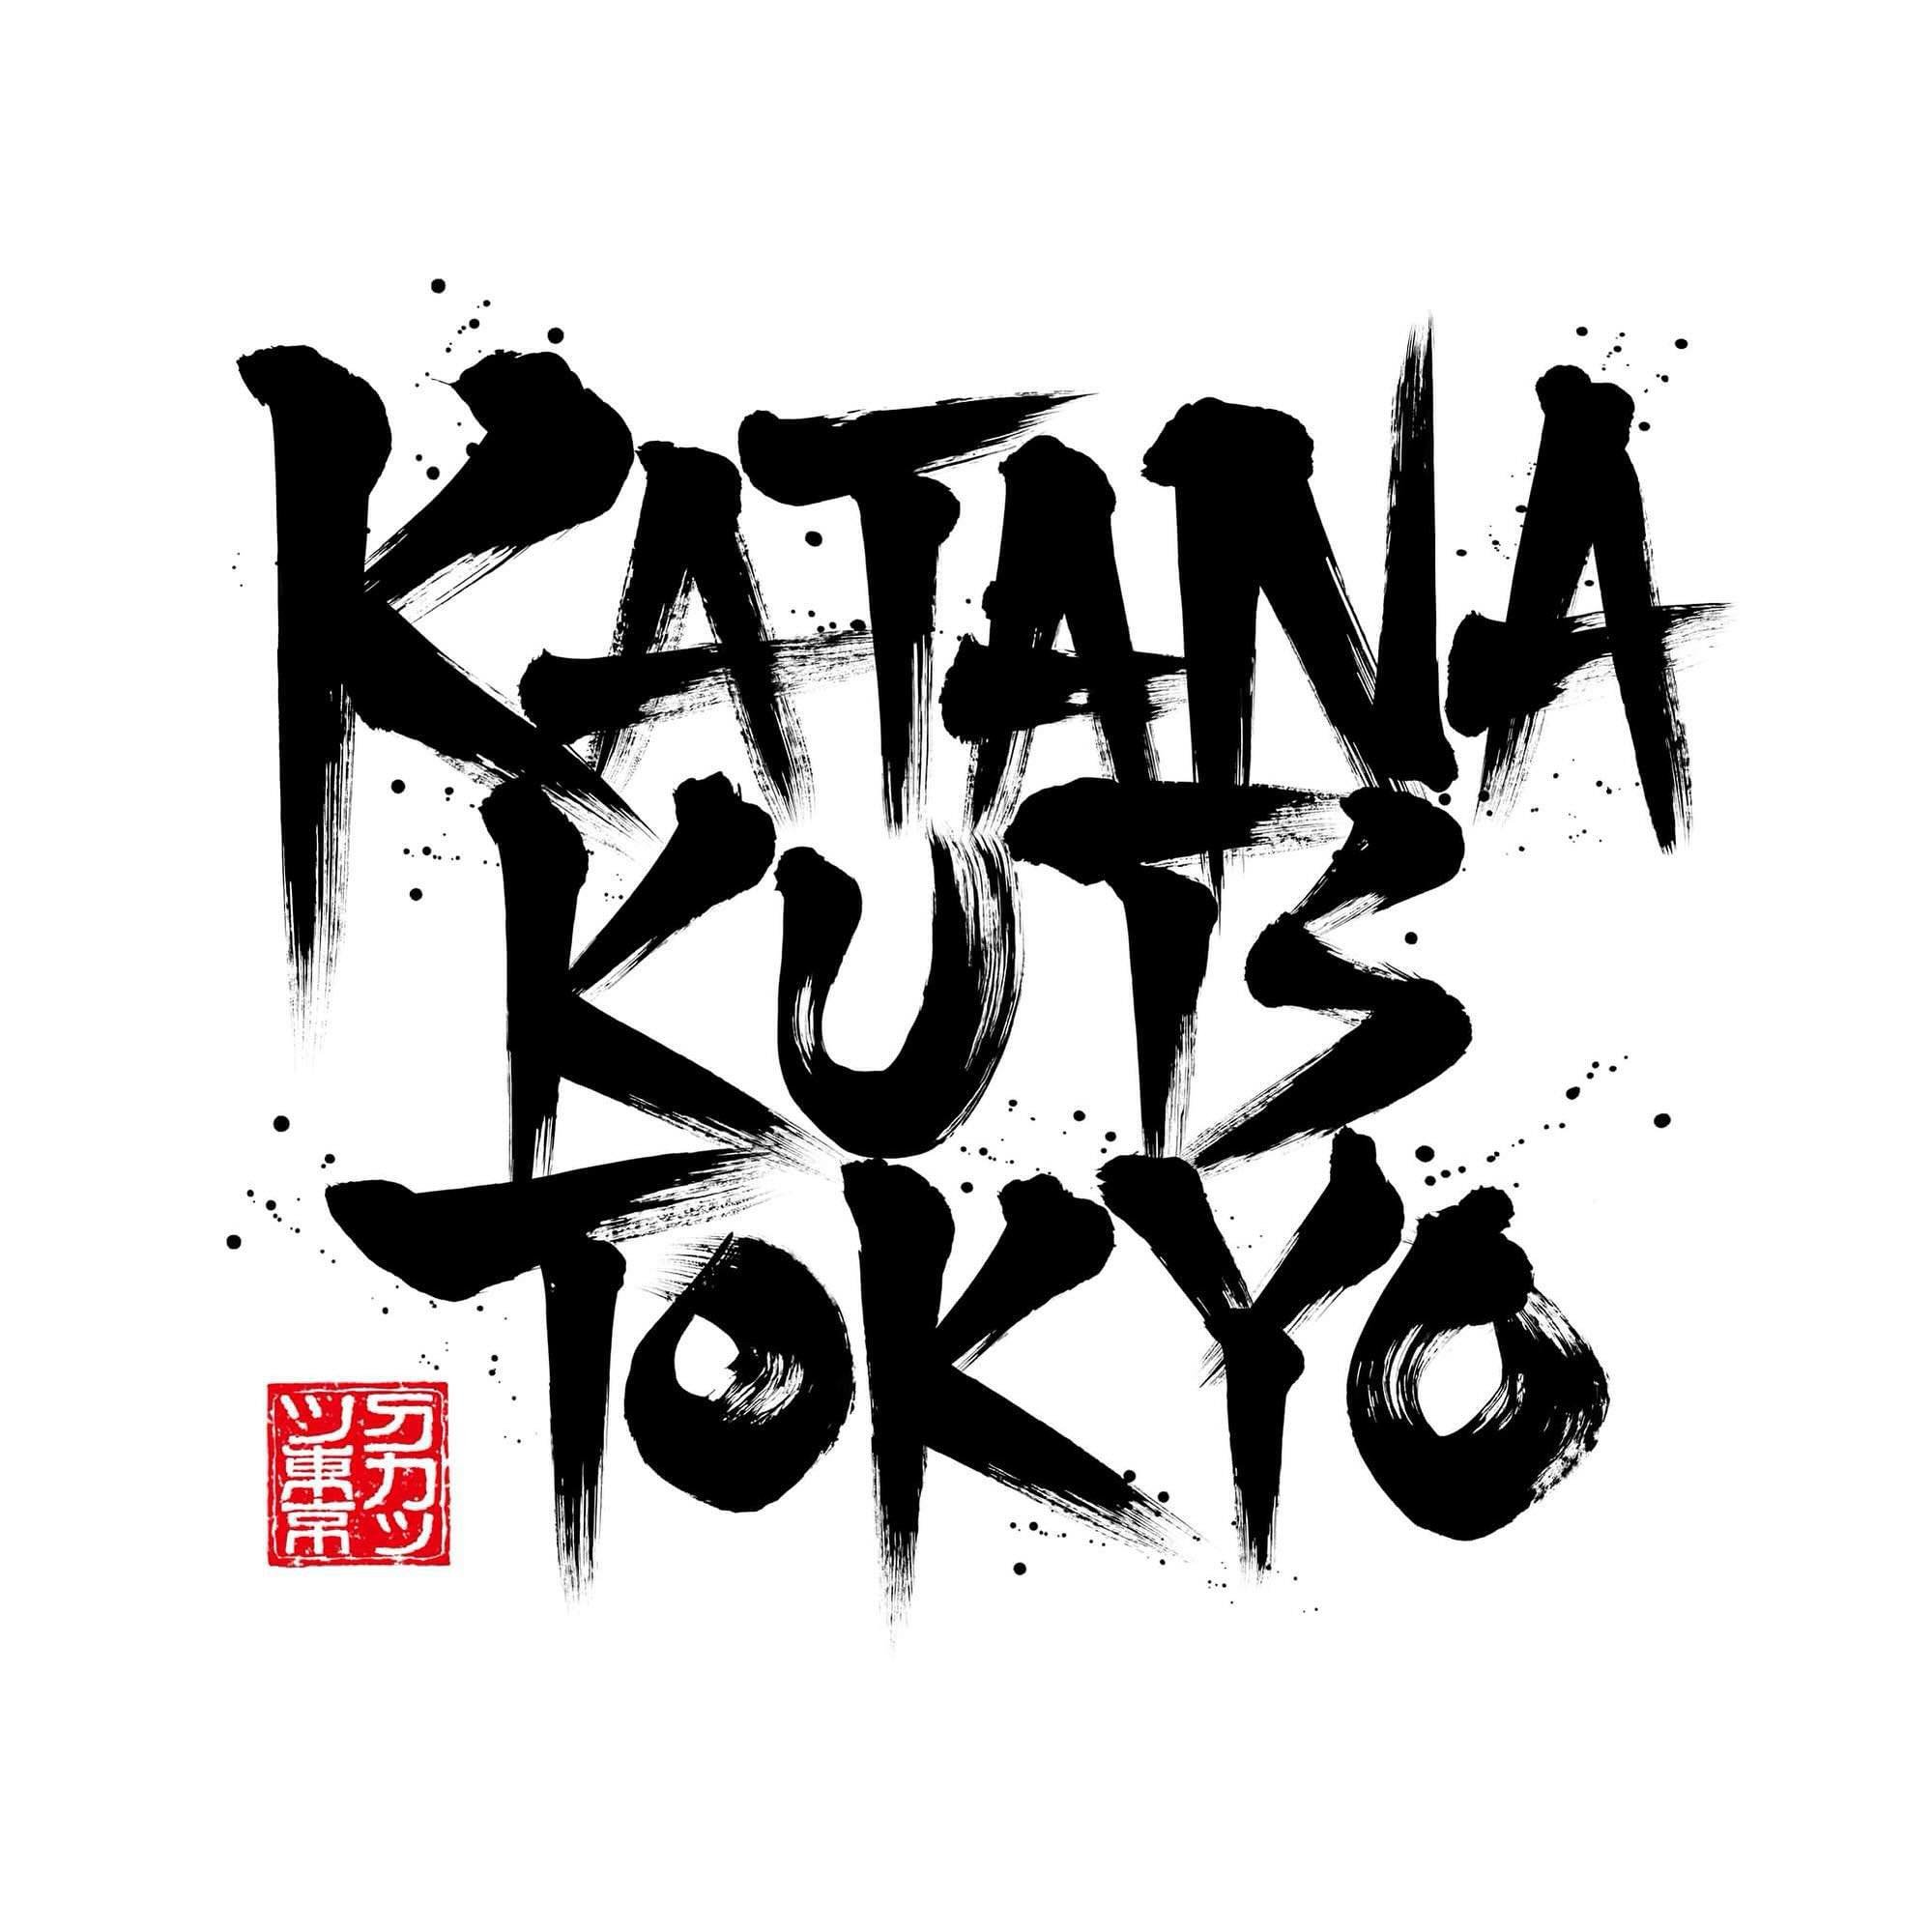 Recent work✍🏻
Calligraphy Logo design for KATANA KUTS TOKYO

I also designed a red seal for this logo 🟥

#japanesecalligraphy #書道 #習字 #shodo #shodō #inkart #kanji #漢字 #calligraphy #kanji #kanjicalligraphy #kanjitattoo #logo #logodesigner #ロゴ #ロゴデザイ